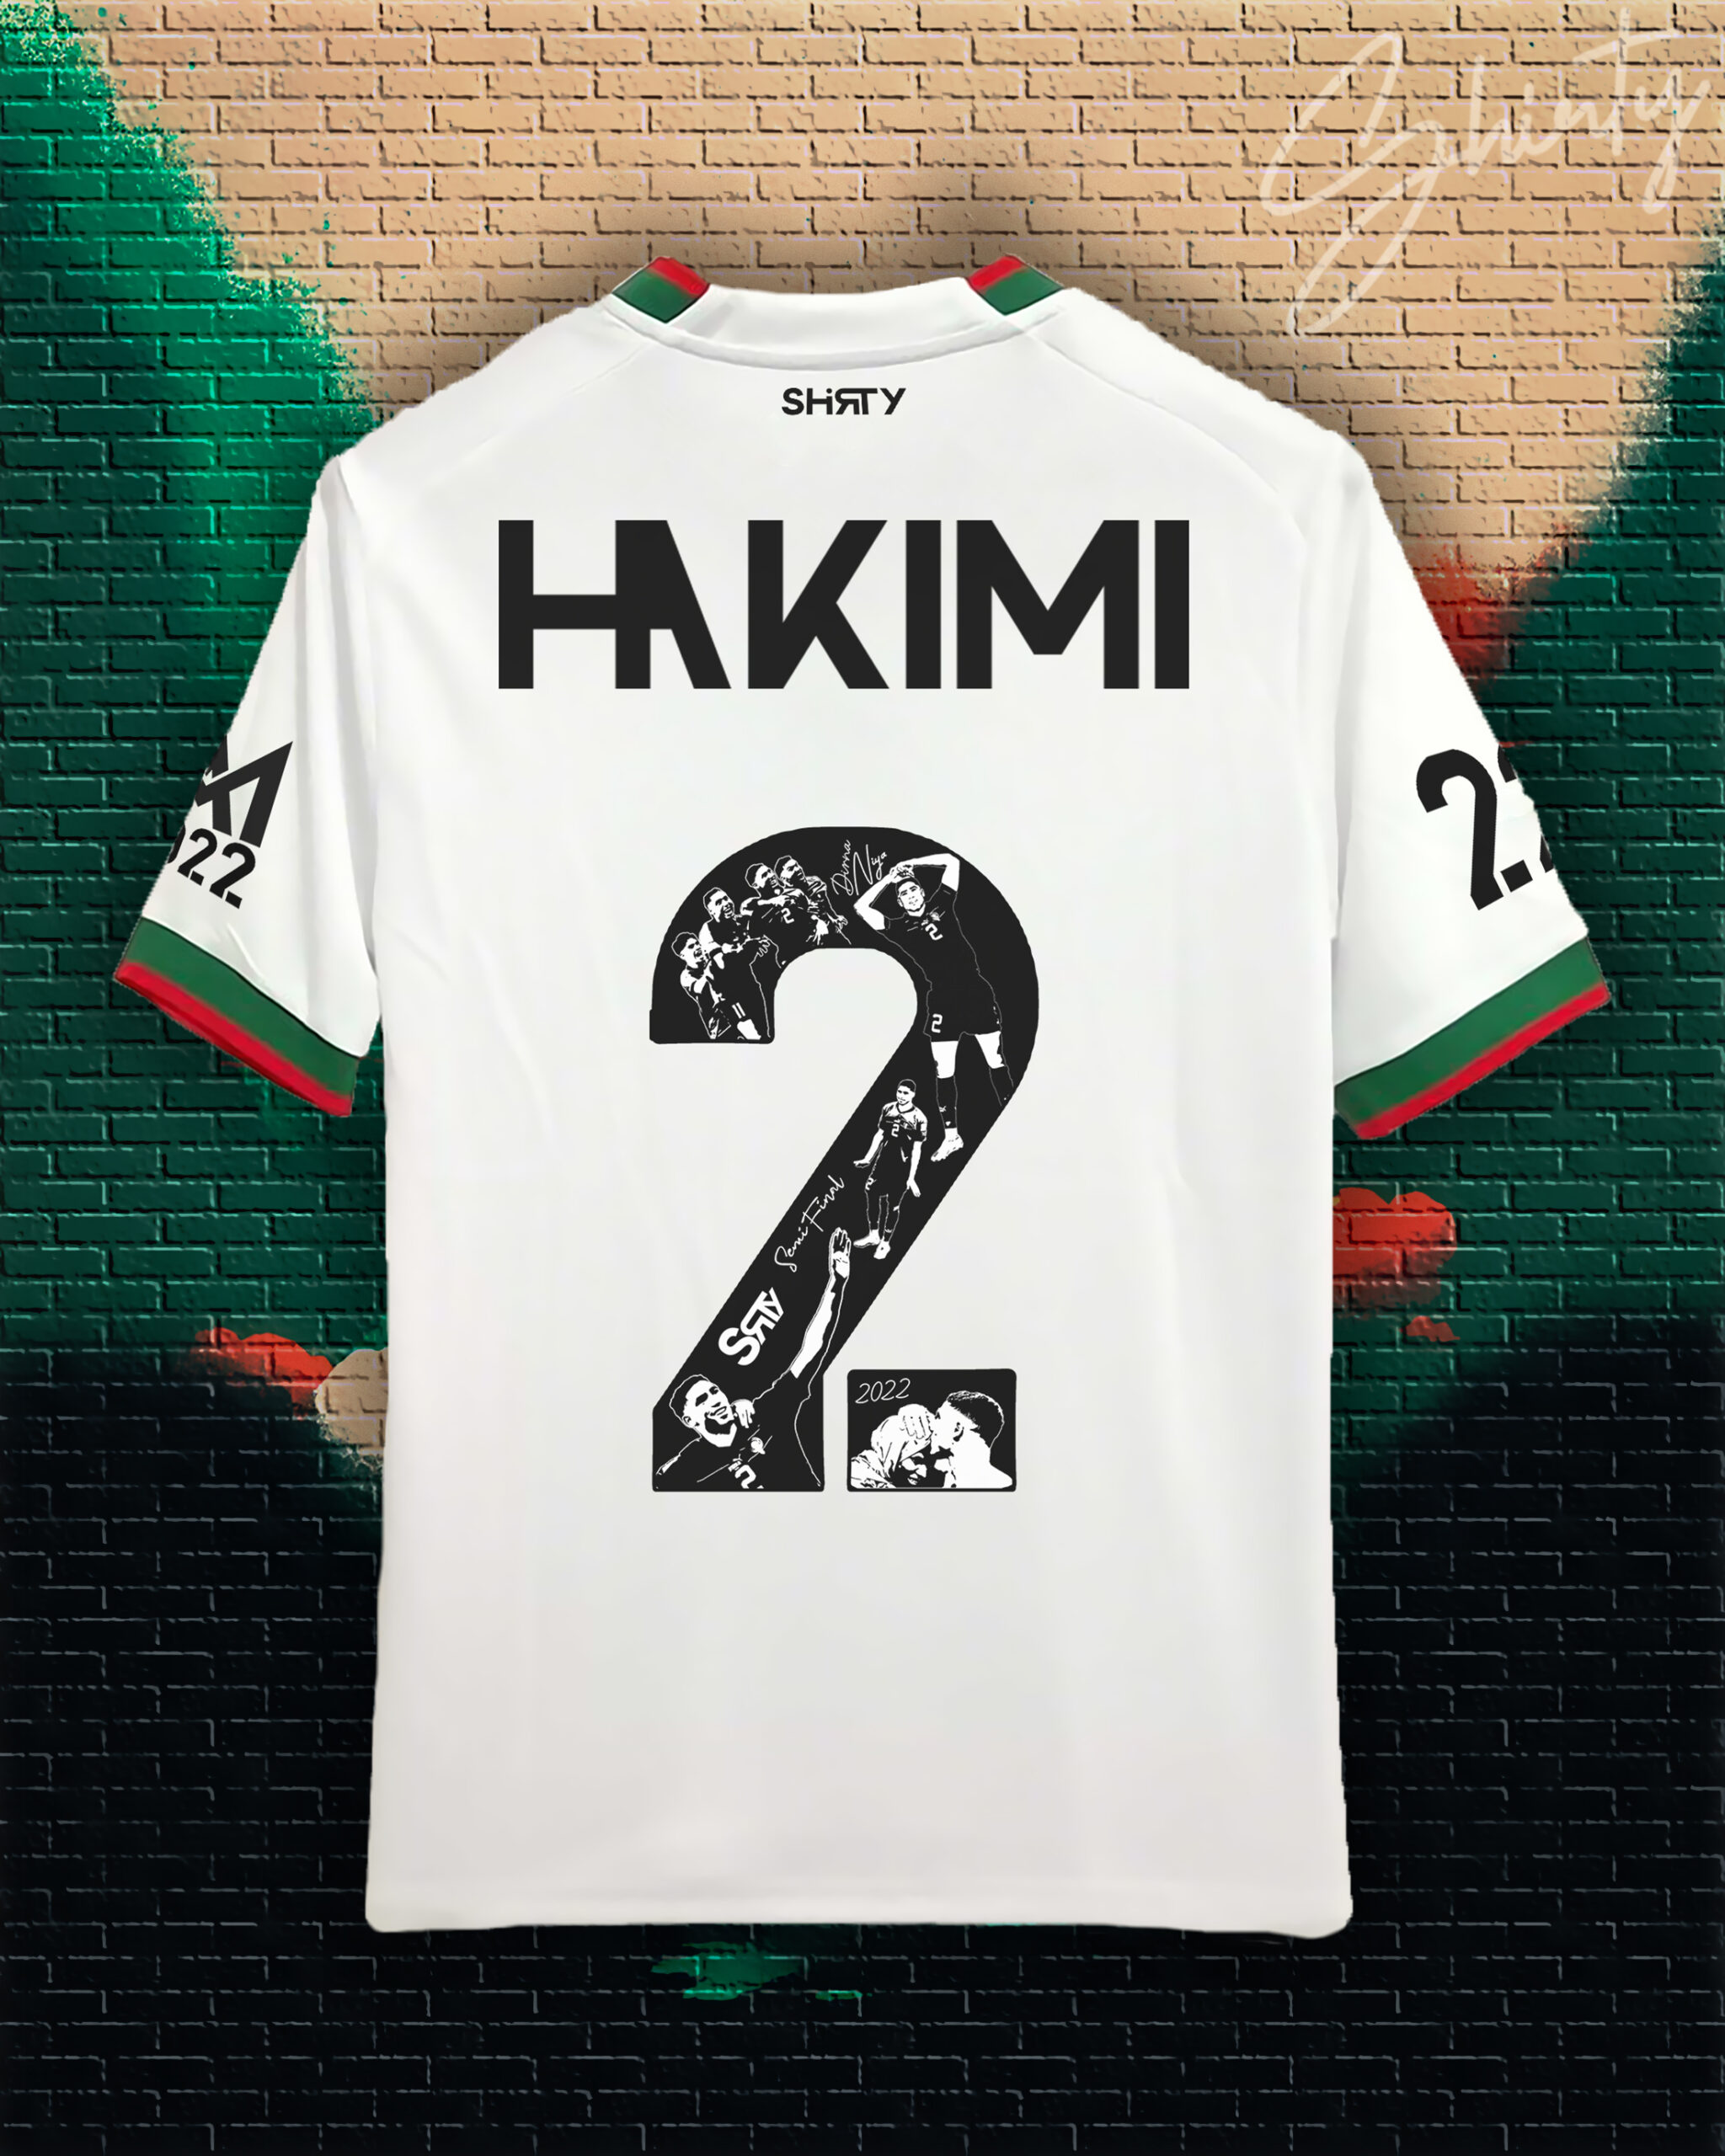 hakimi jersey number